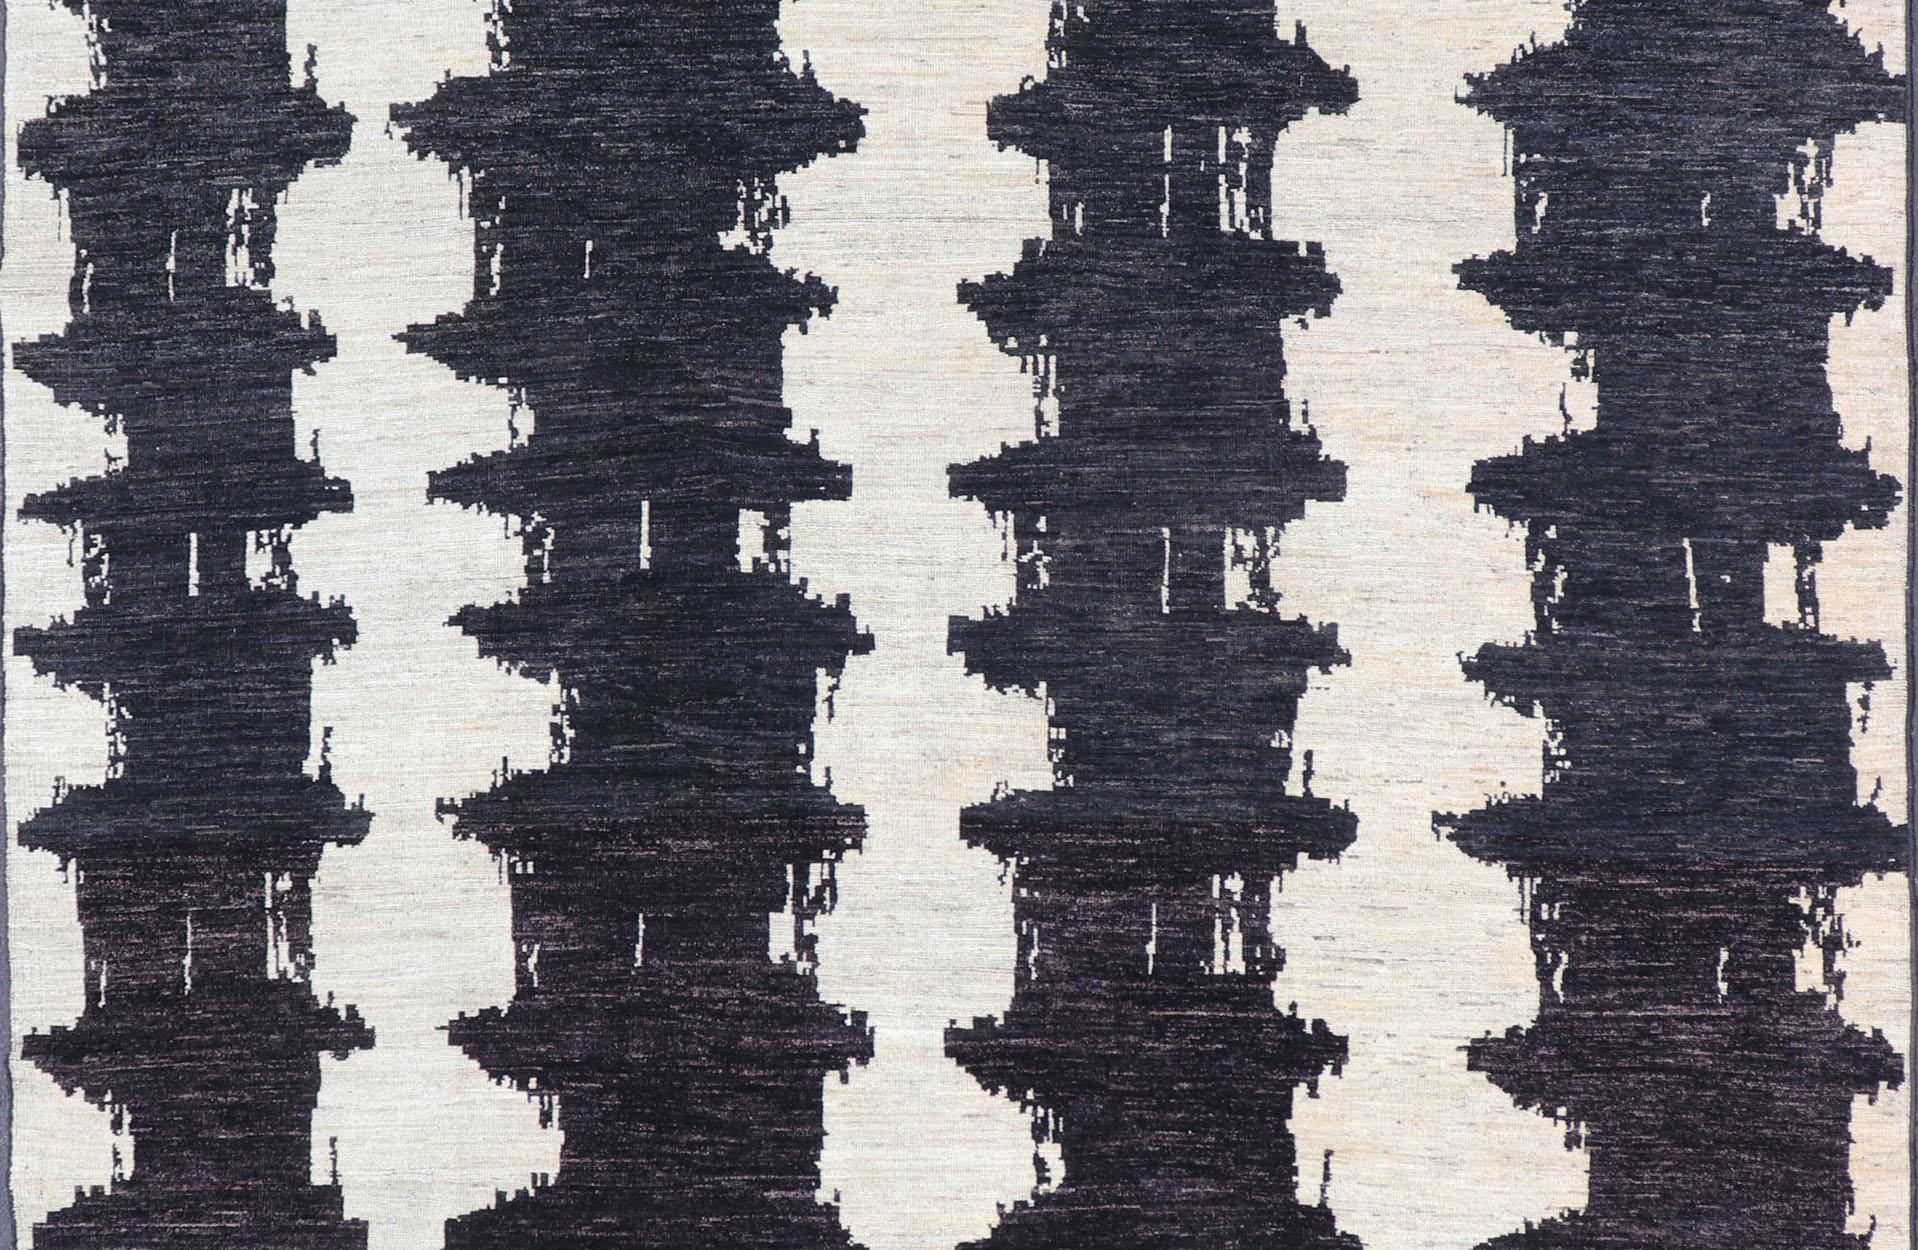 Measures 9'6 x 12'1 

This modern casual Afghan rug has a minimalistic design of vertical motifs paneled asymmetrically in black and white. This piece has been hand-knotted with a piled texture, giving the foundation durability.

Modern Afghan